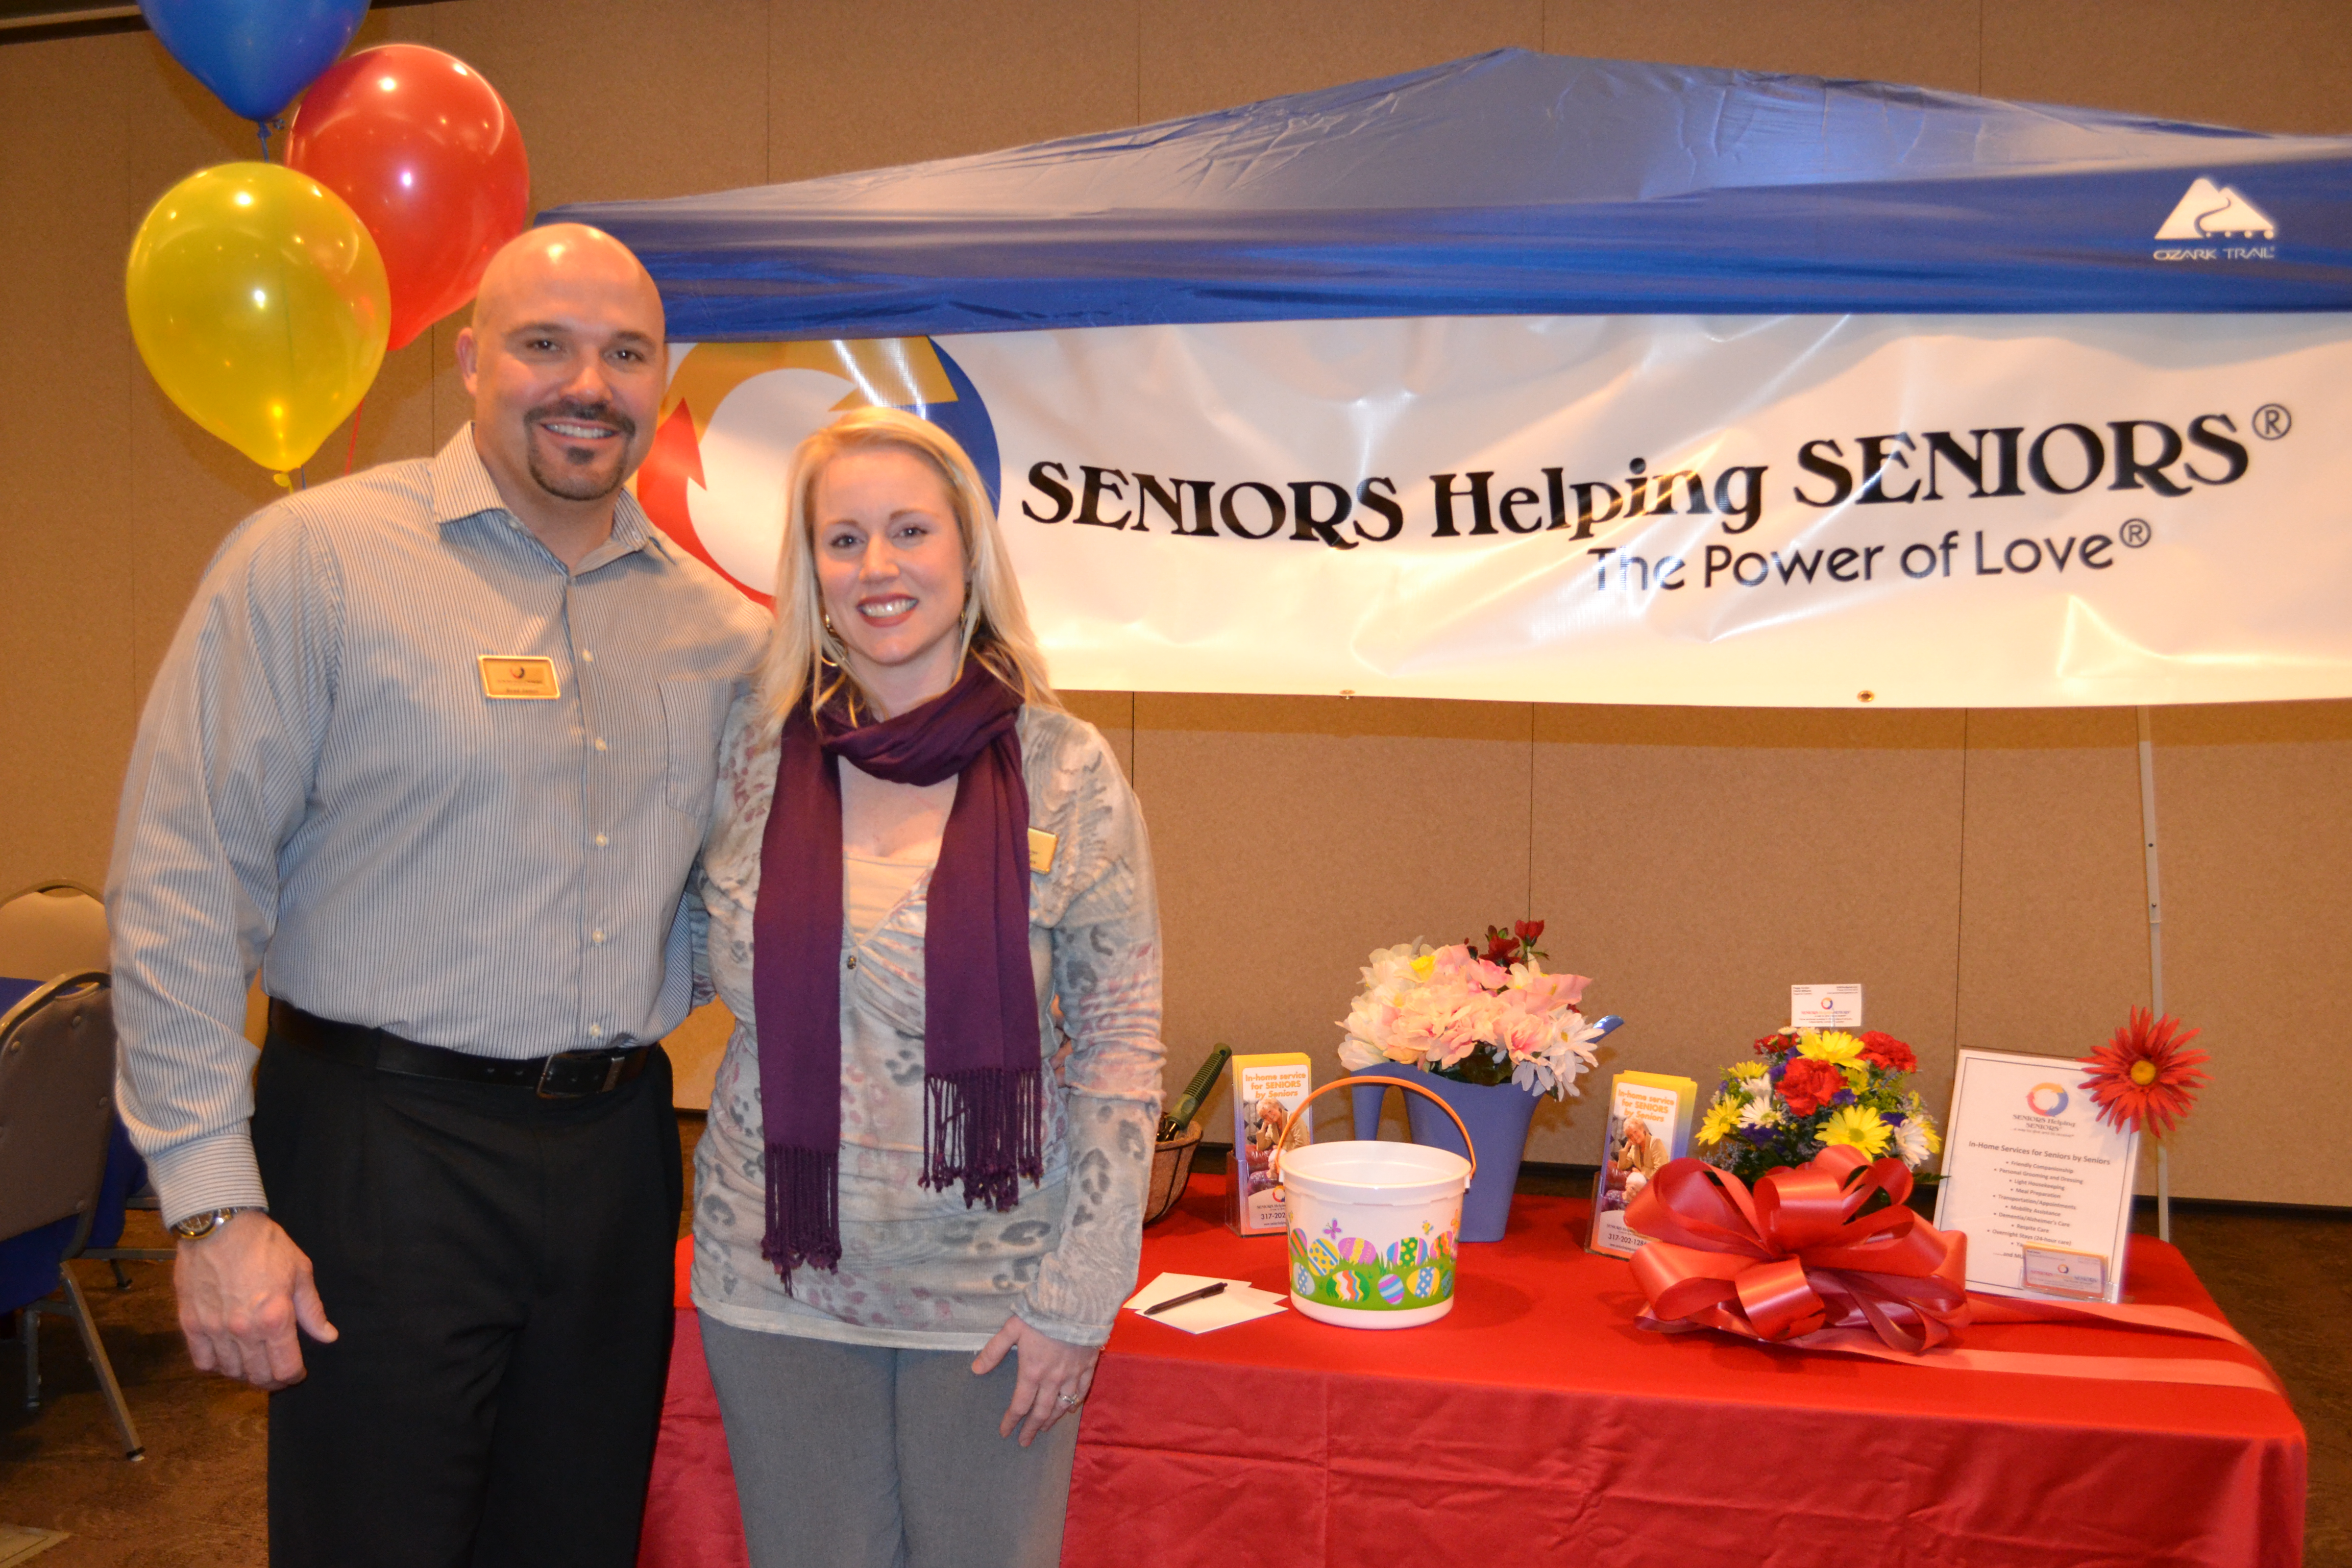 Brad and Christina James, owners of Seniors Help- ing Seniors, at a ribbon cutting for their business